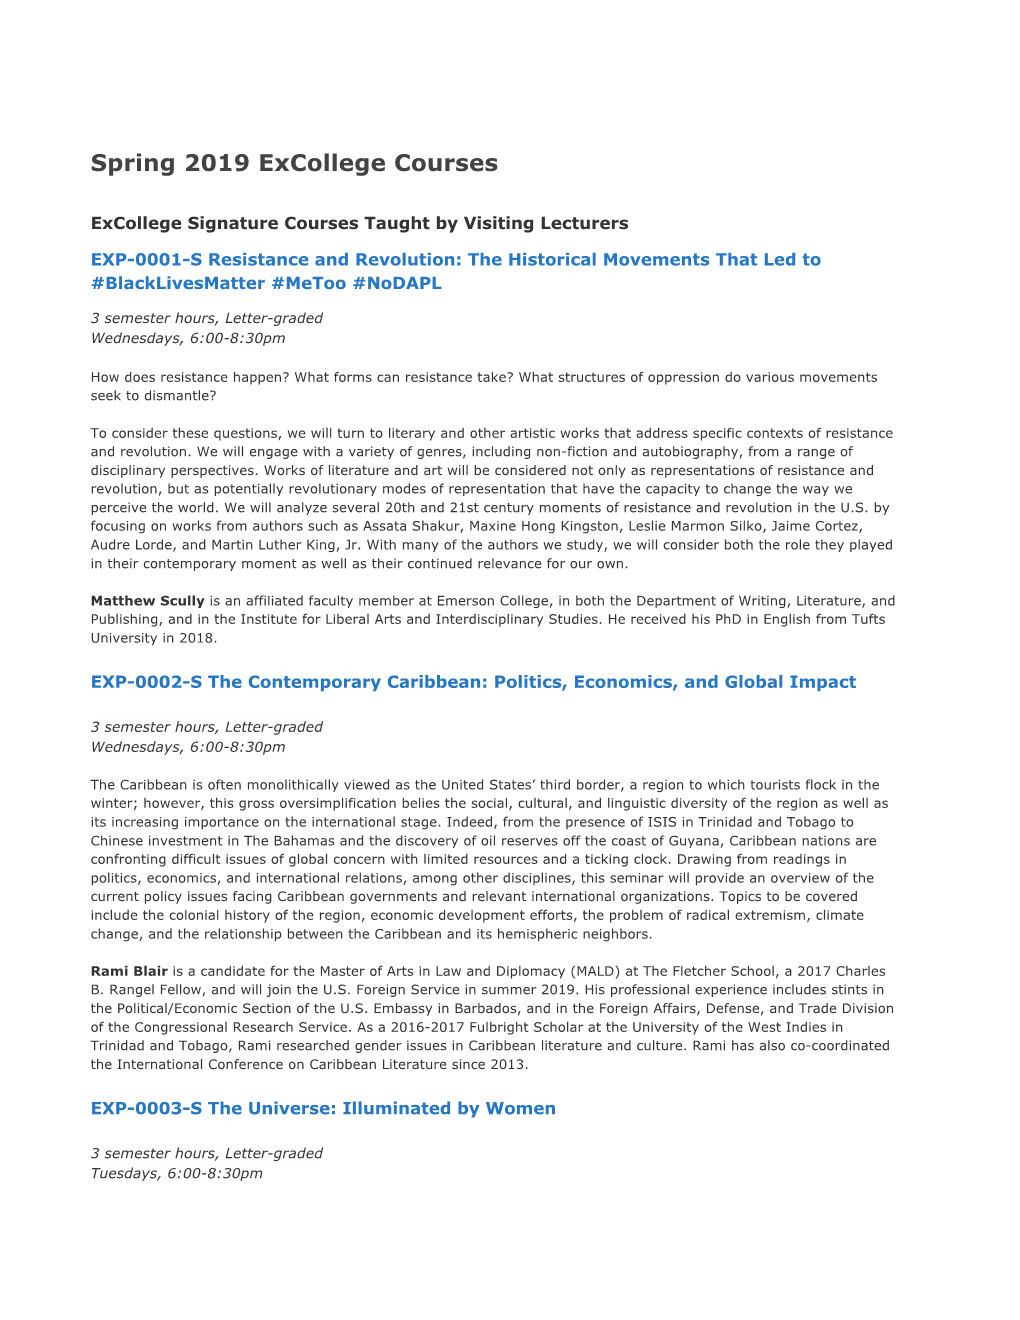 Spring 2019 Excollege Courses